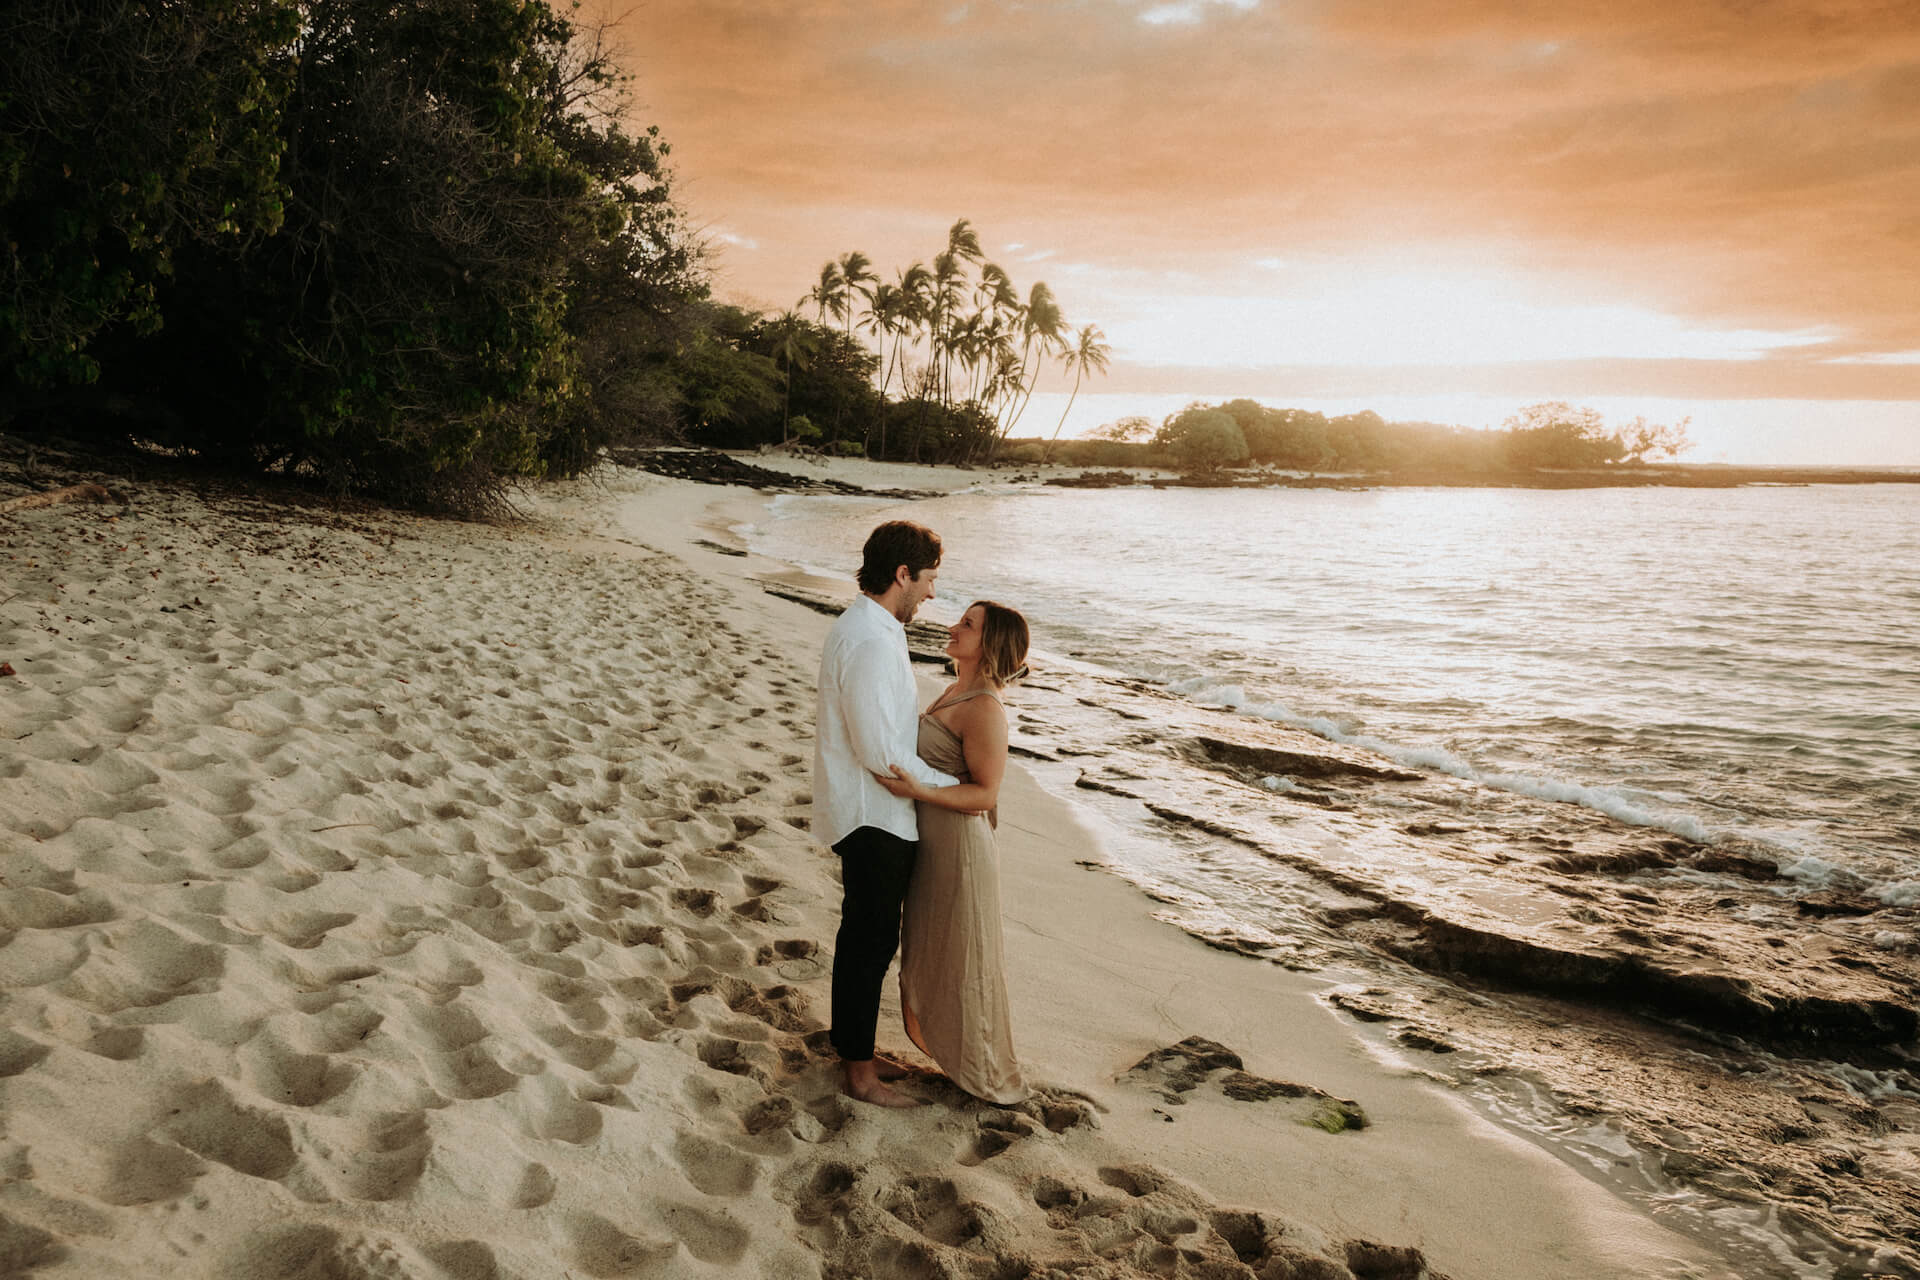 Hawaii Proposal Ideas: 9 BEST Places for an Engagement